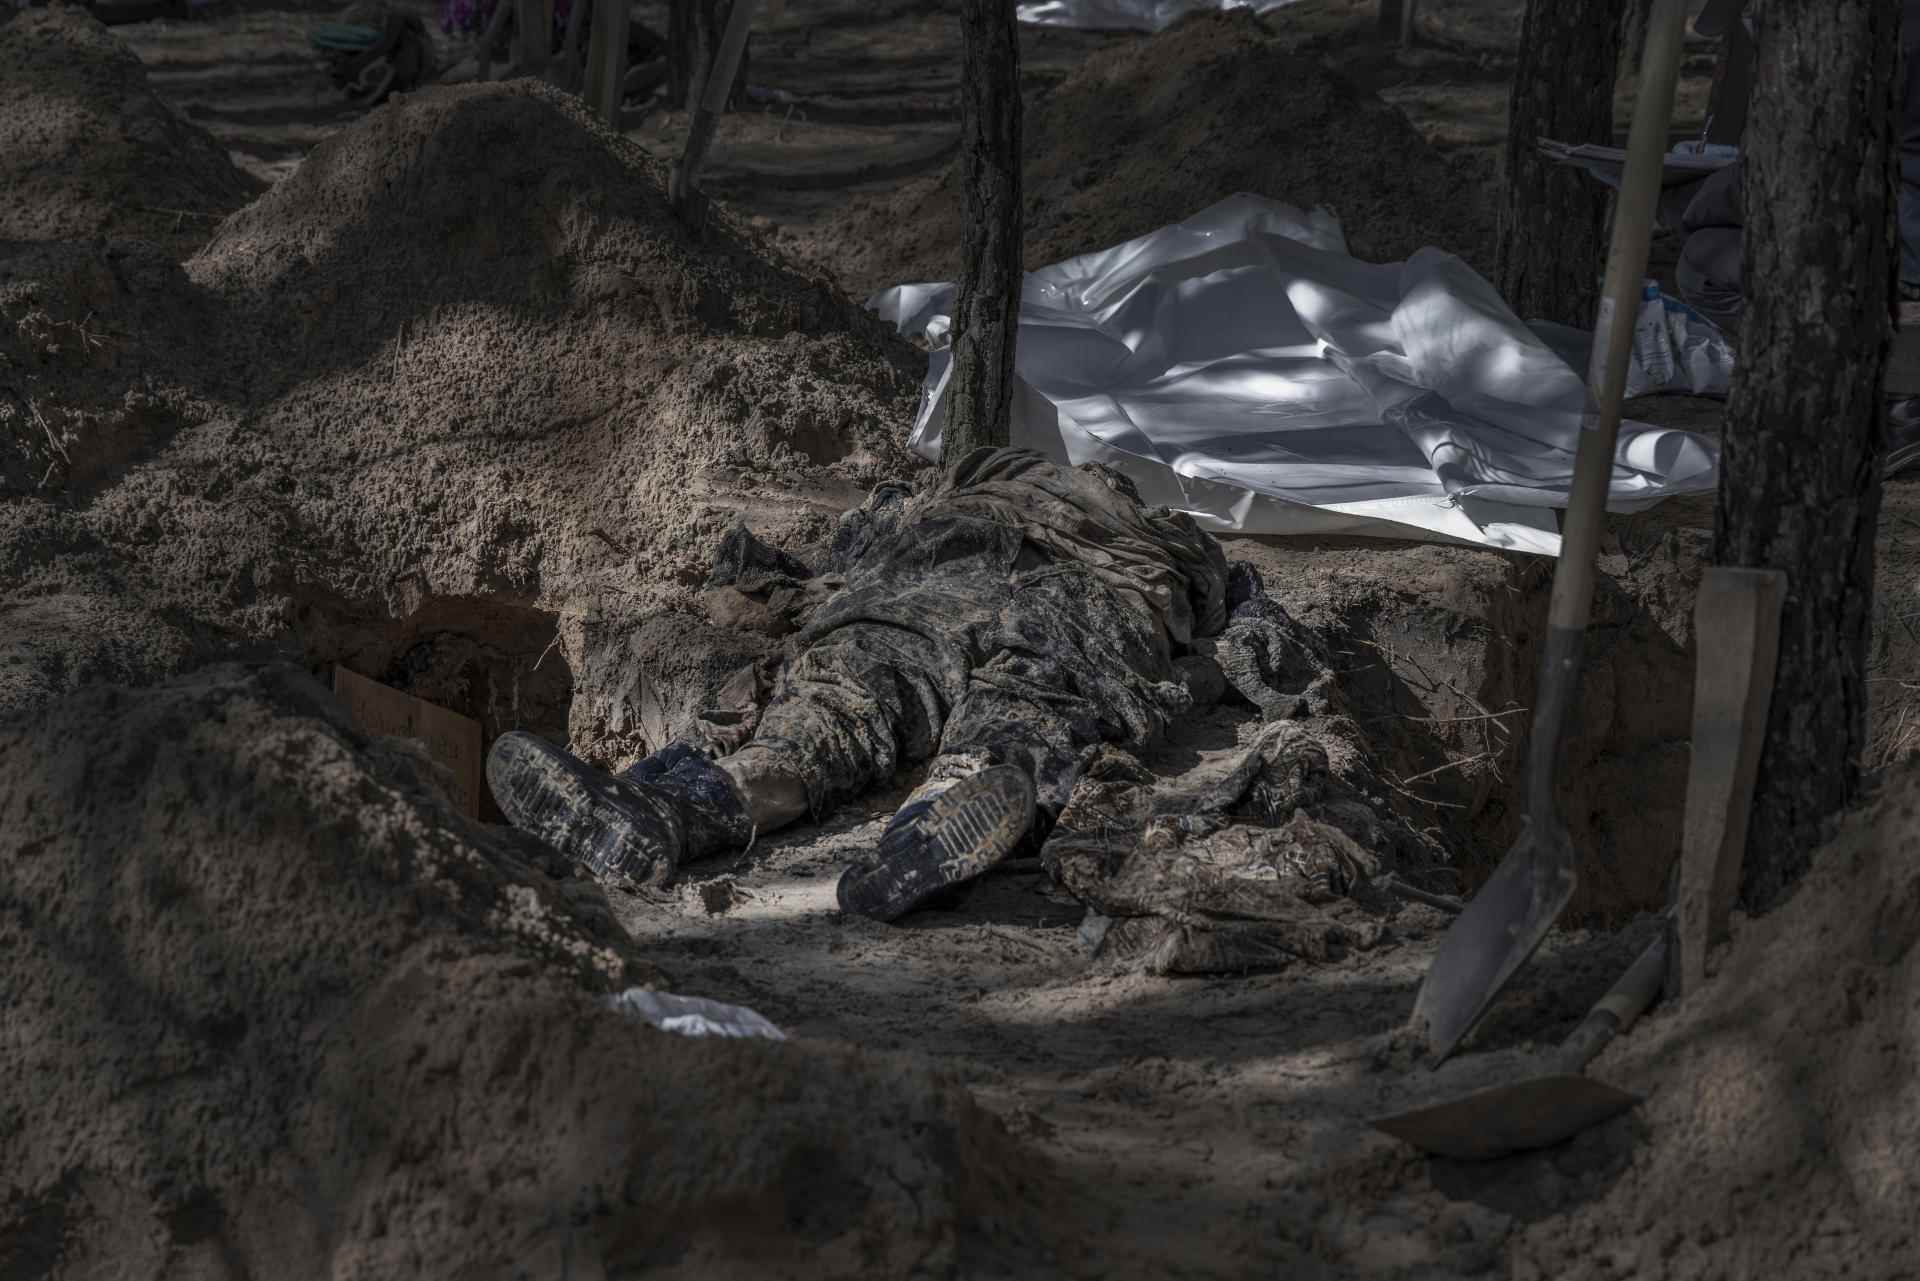 Kharkiv police investigators exhume more than 400 bodies summarily buried in the outskirts of Izium, Ukraine, during the Russian occupation, September 17, 2022.